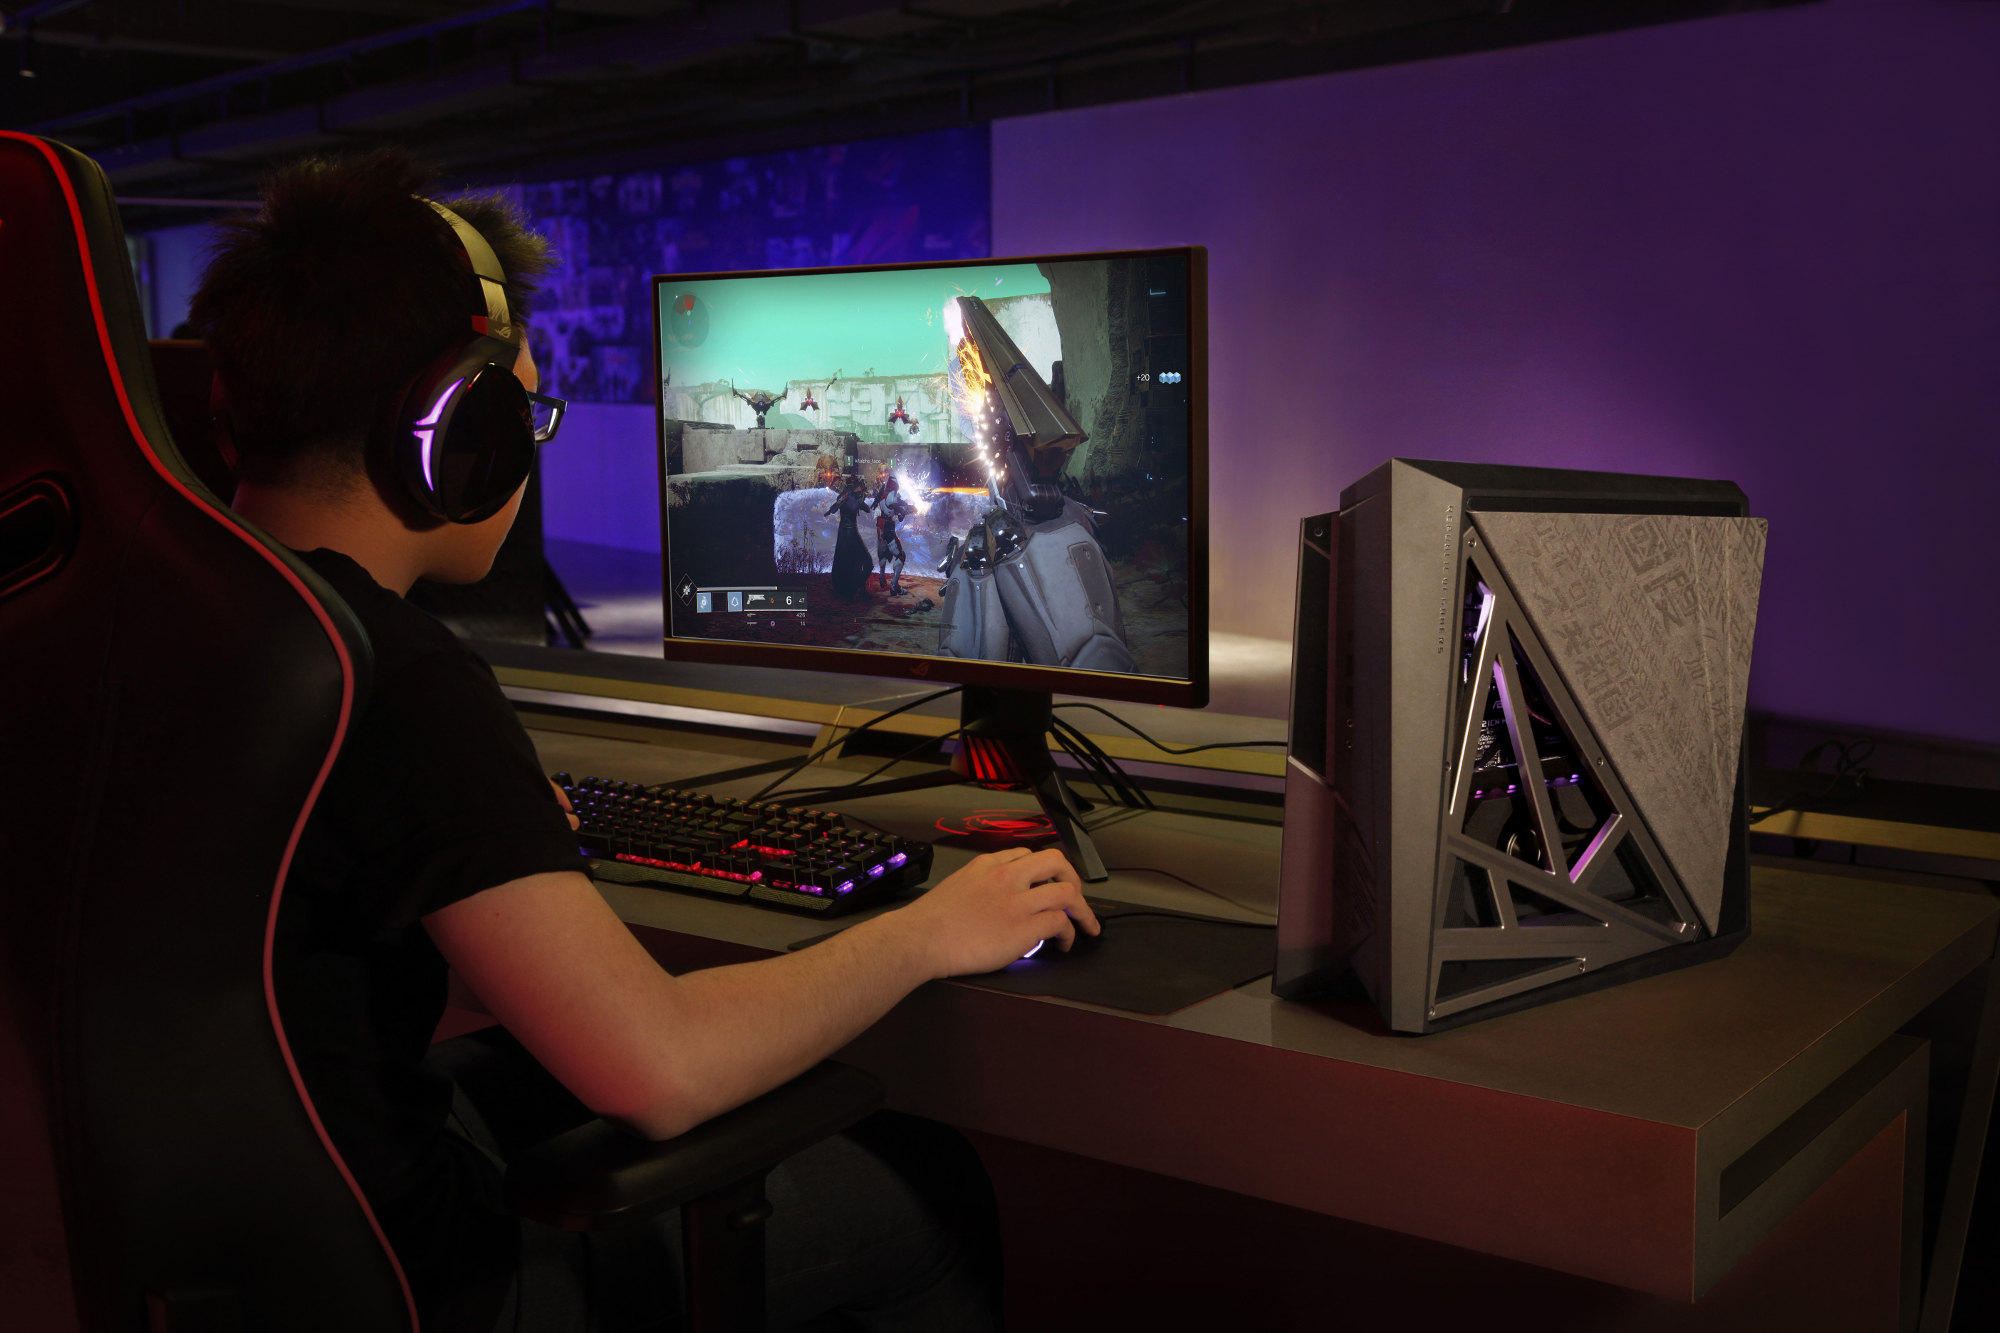 Meet the ROG Huracan G21 compact gaming desktop and its surprise side panel